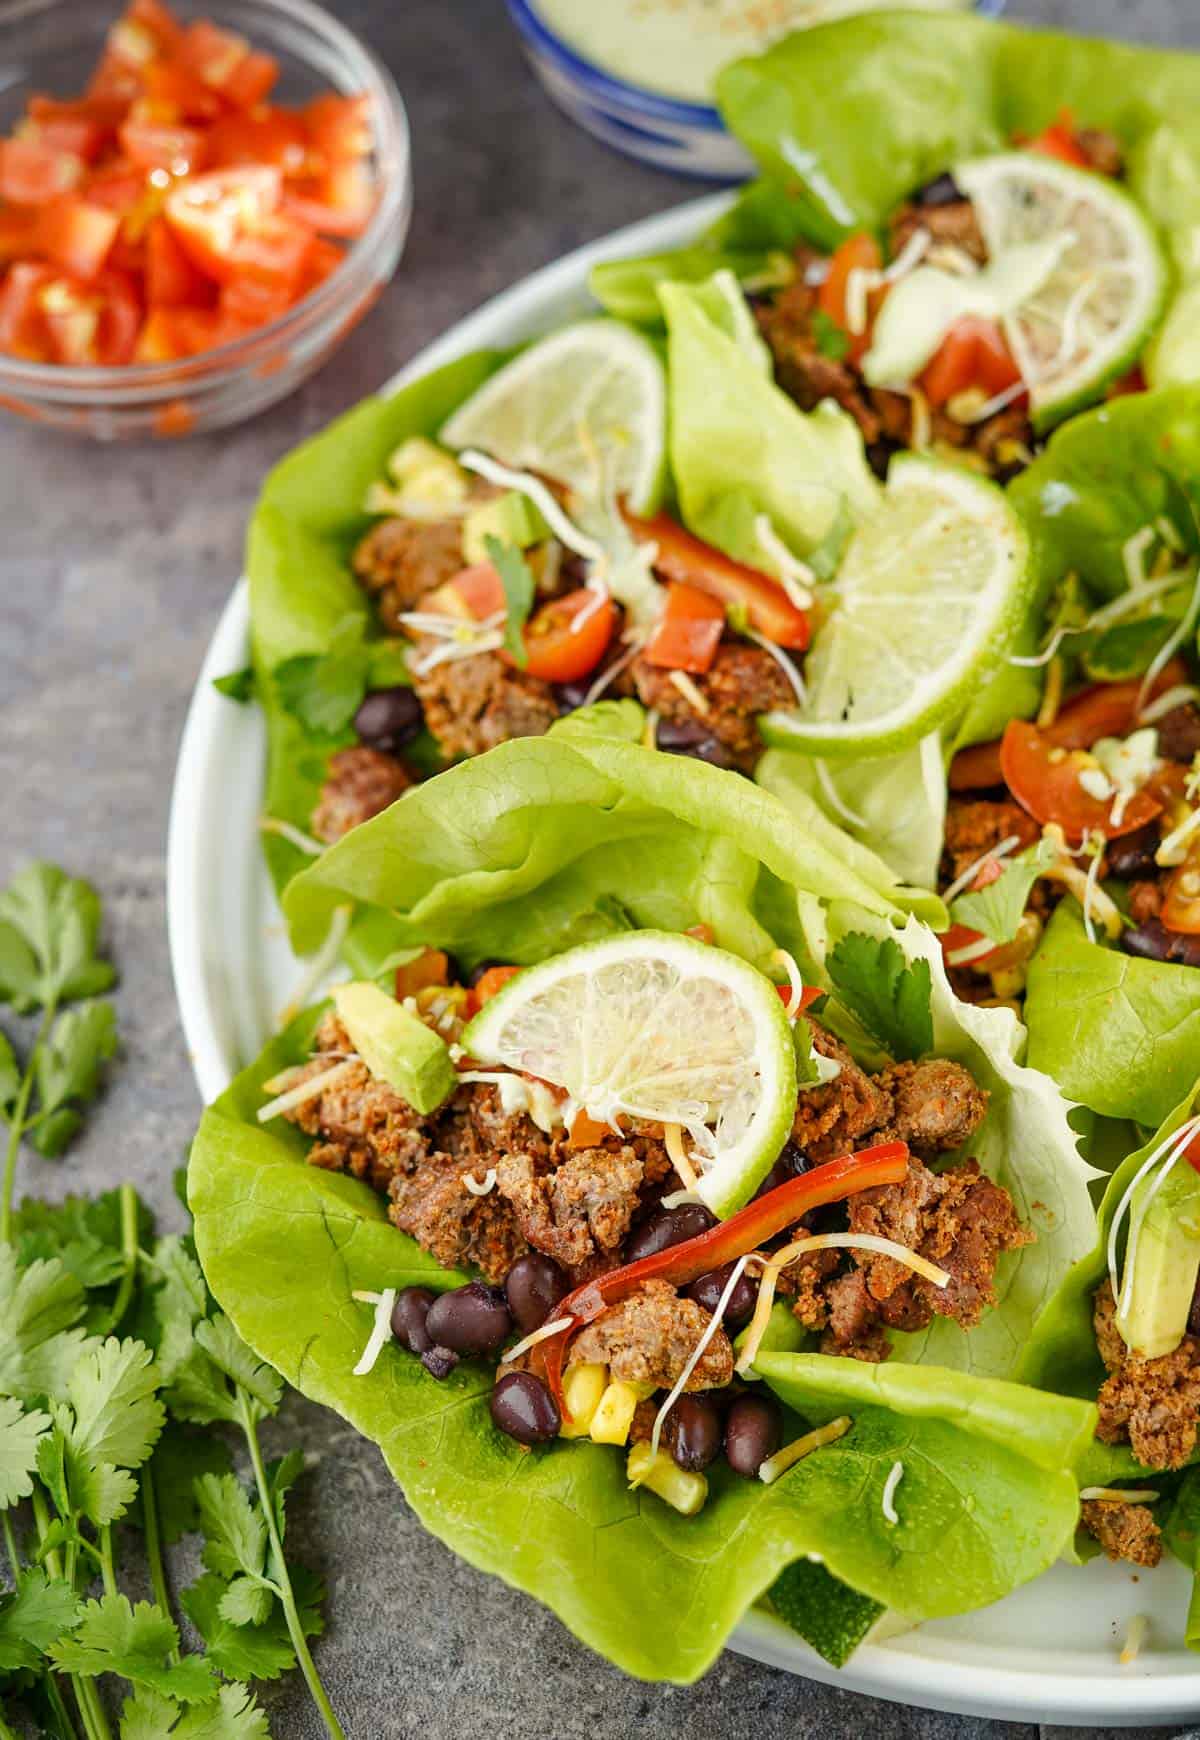 A plate filled with Taco Lettuce Wraps filled with smoked ground beef, black beans, cheese, and avocados